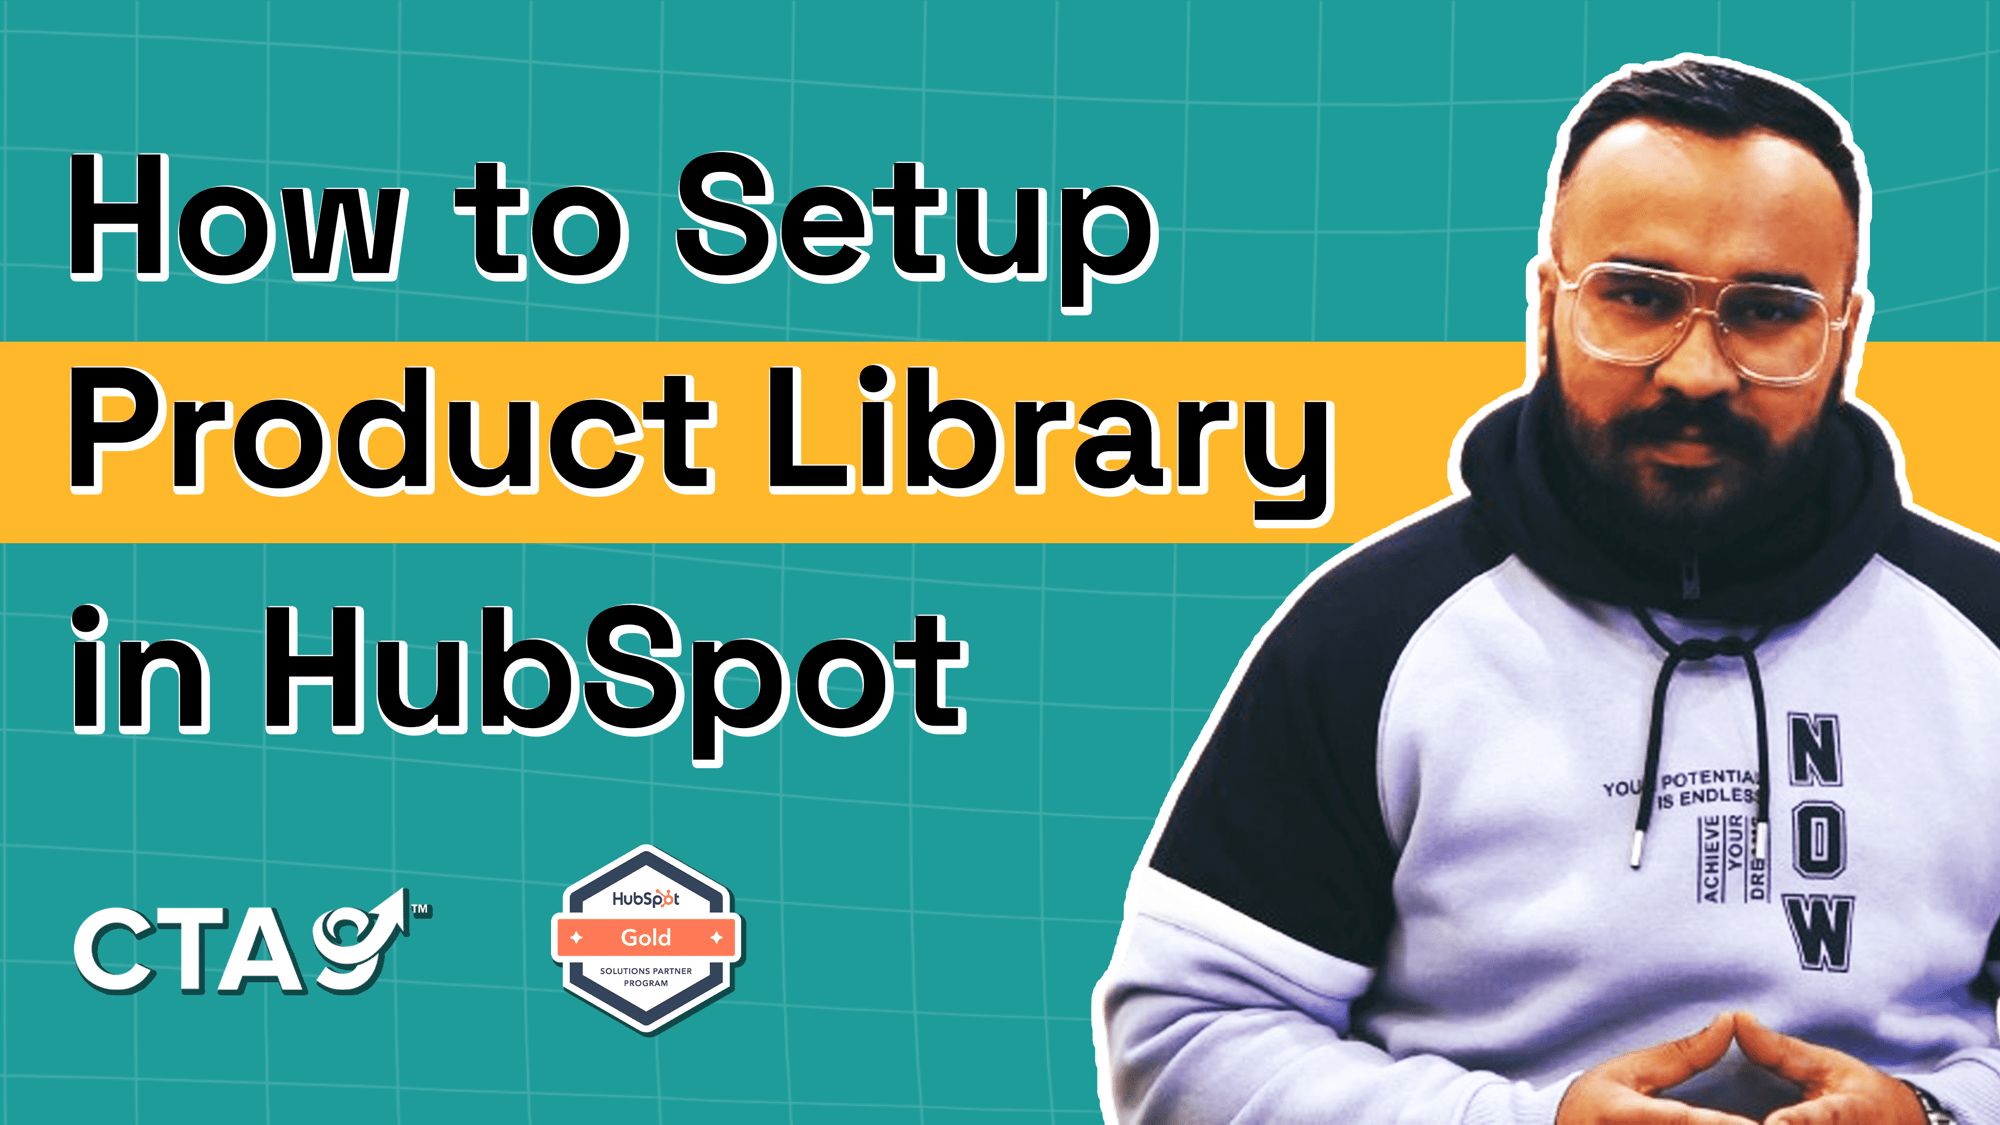 How to Setup Product Library in HubSpot